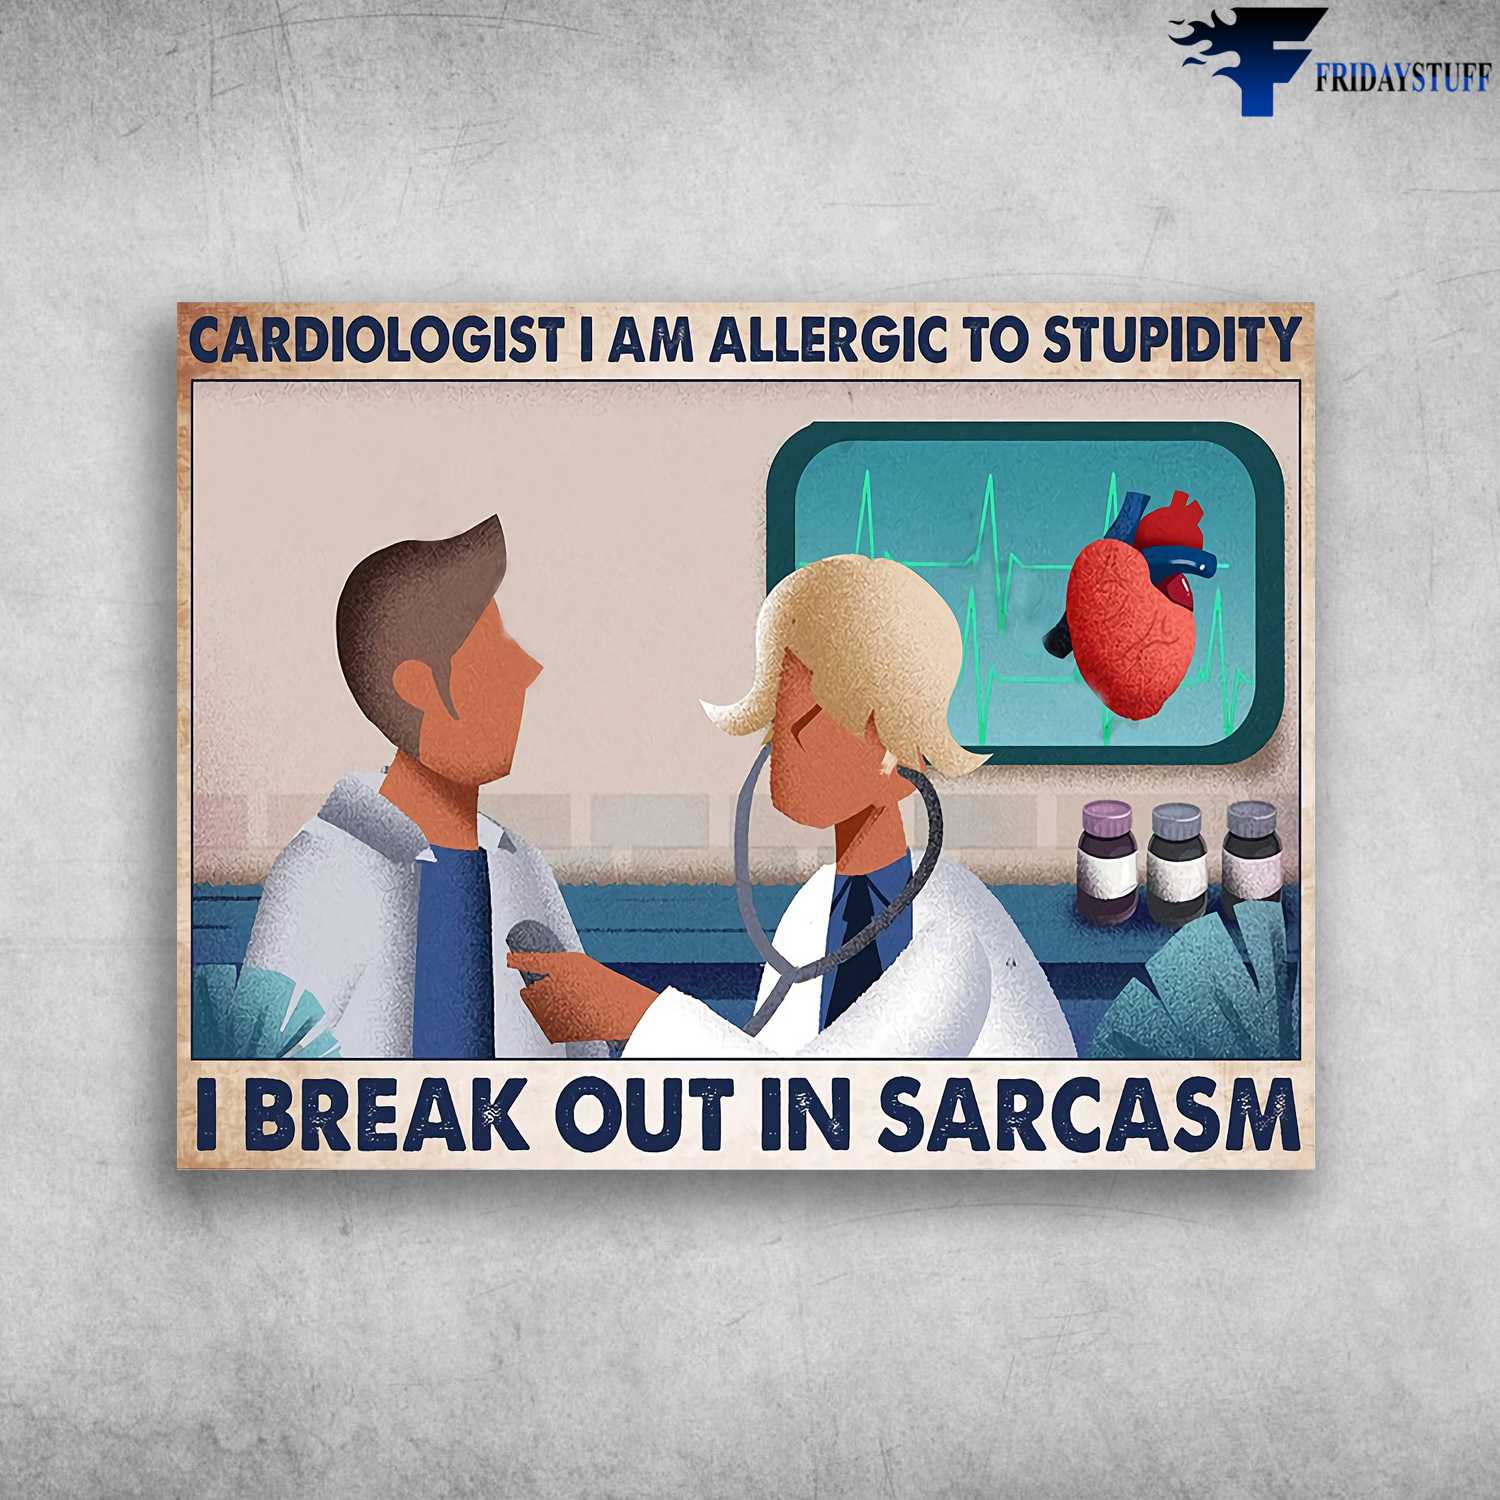 Cardiologist Poster - Cardiologist I Am Allergic To Stupidity, I Break Out In Sarcasm